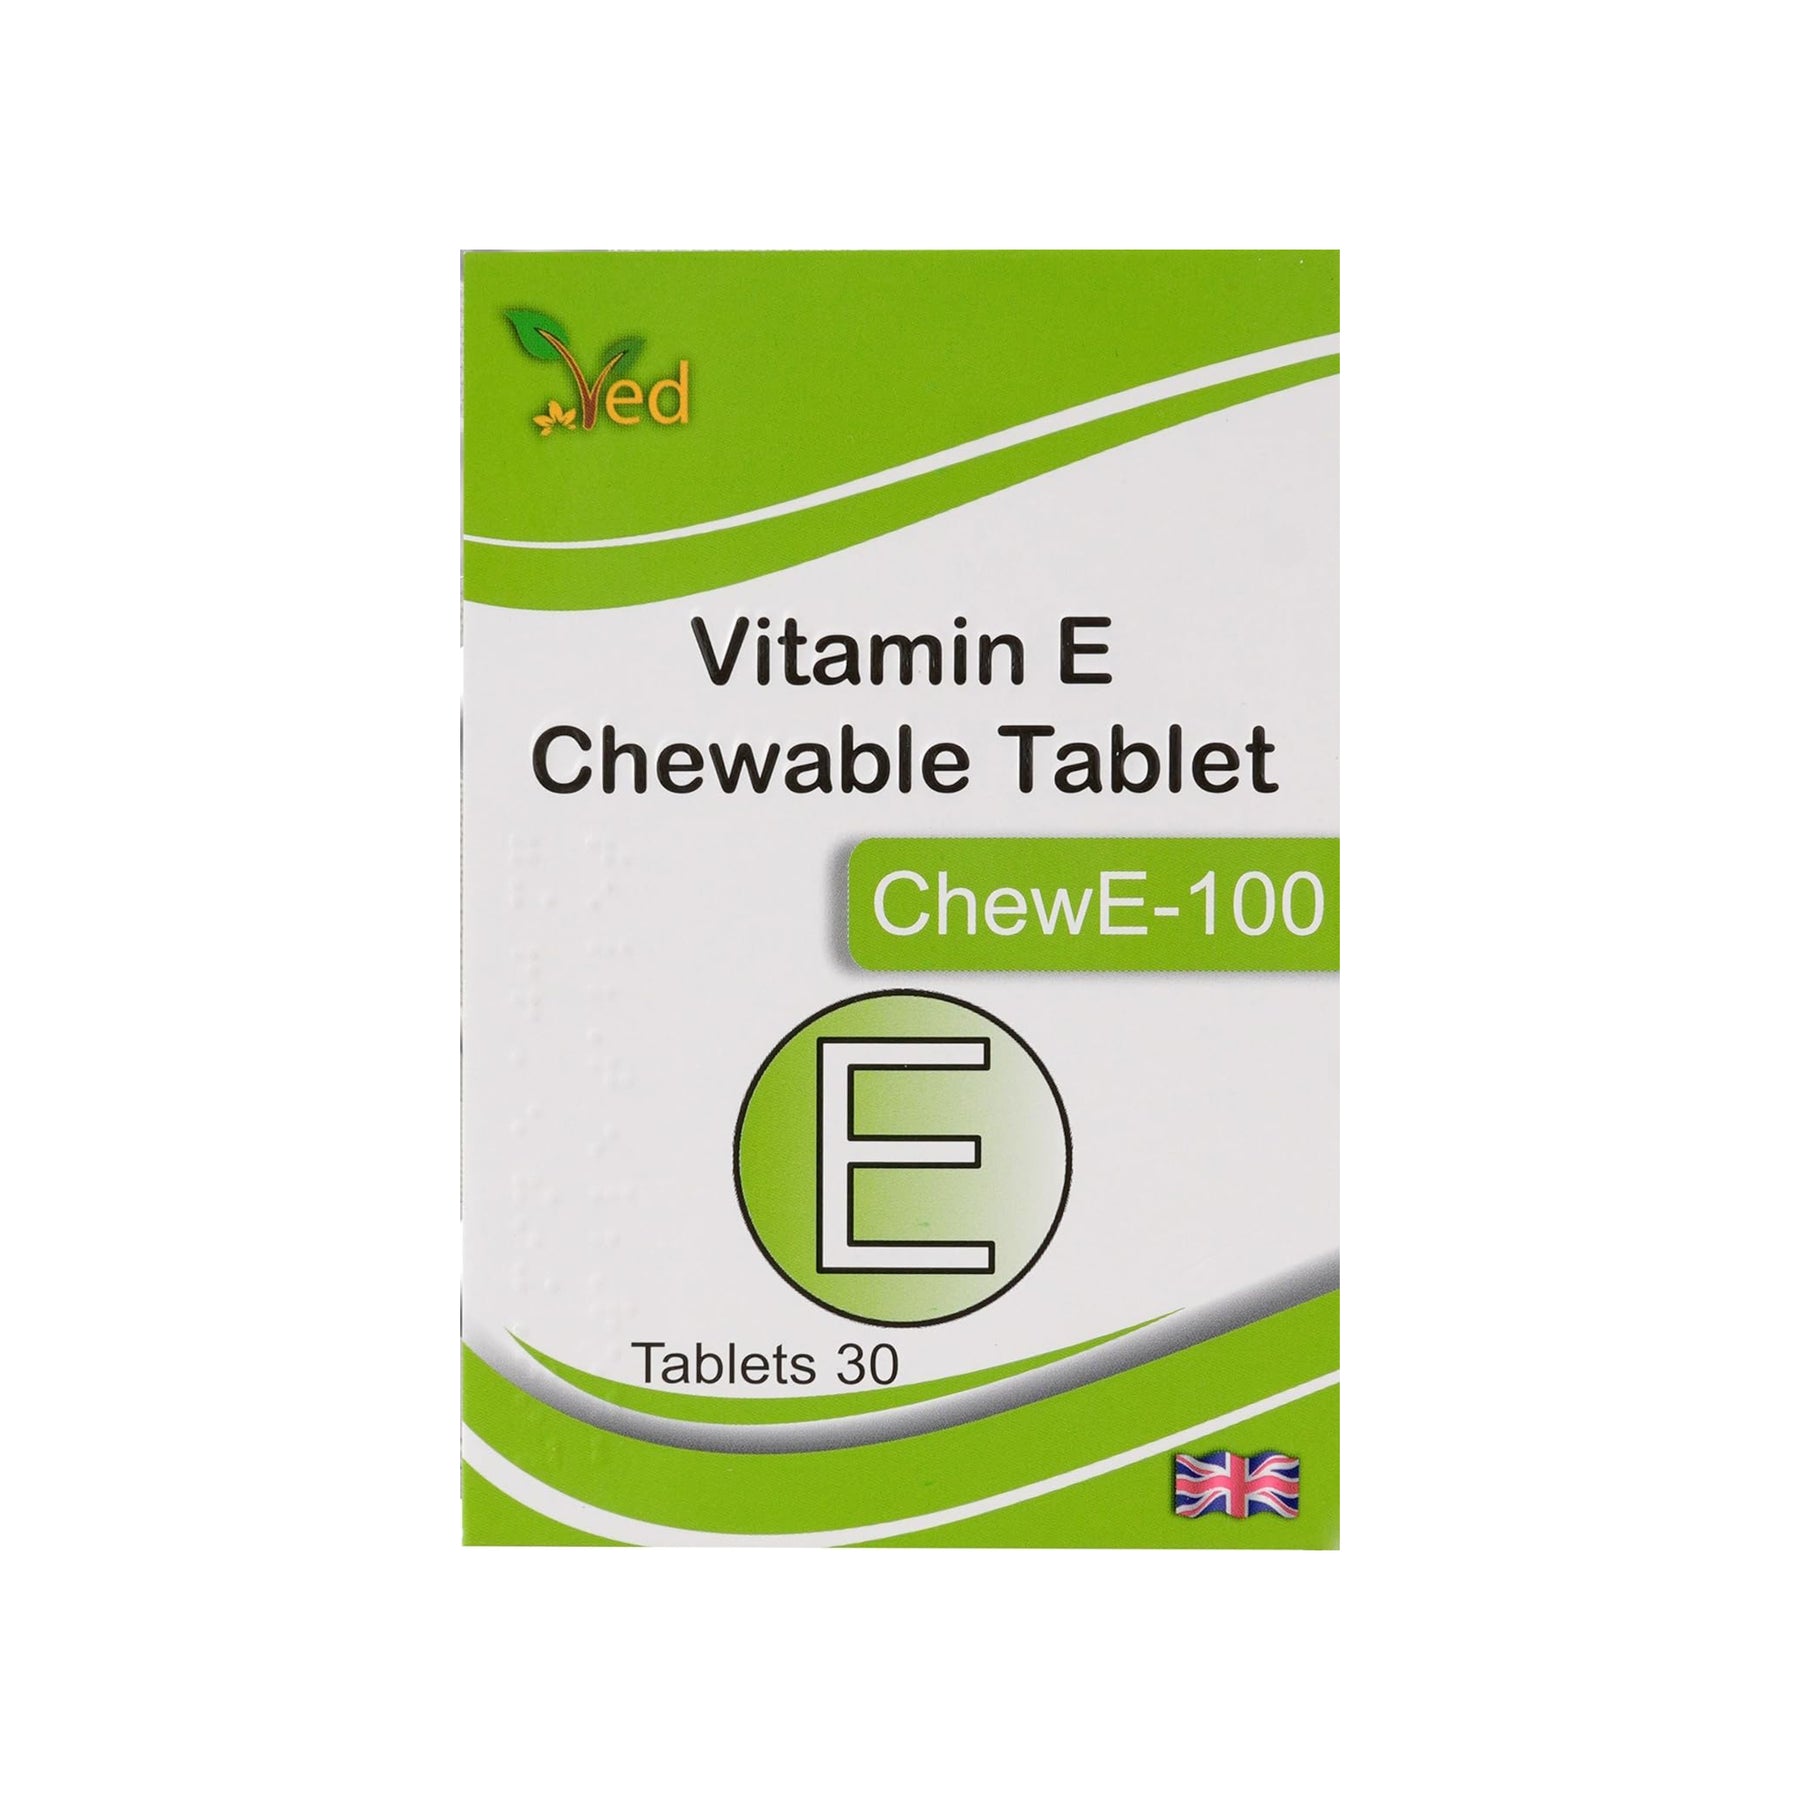 VED VITAMIN E 100 MG CHEWABLE TABLET